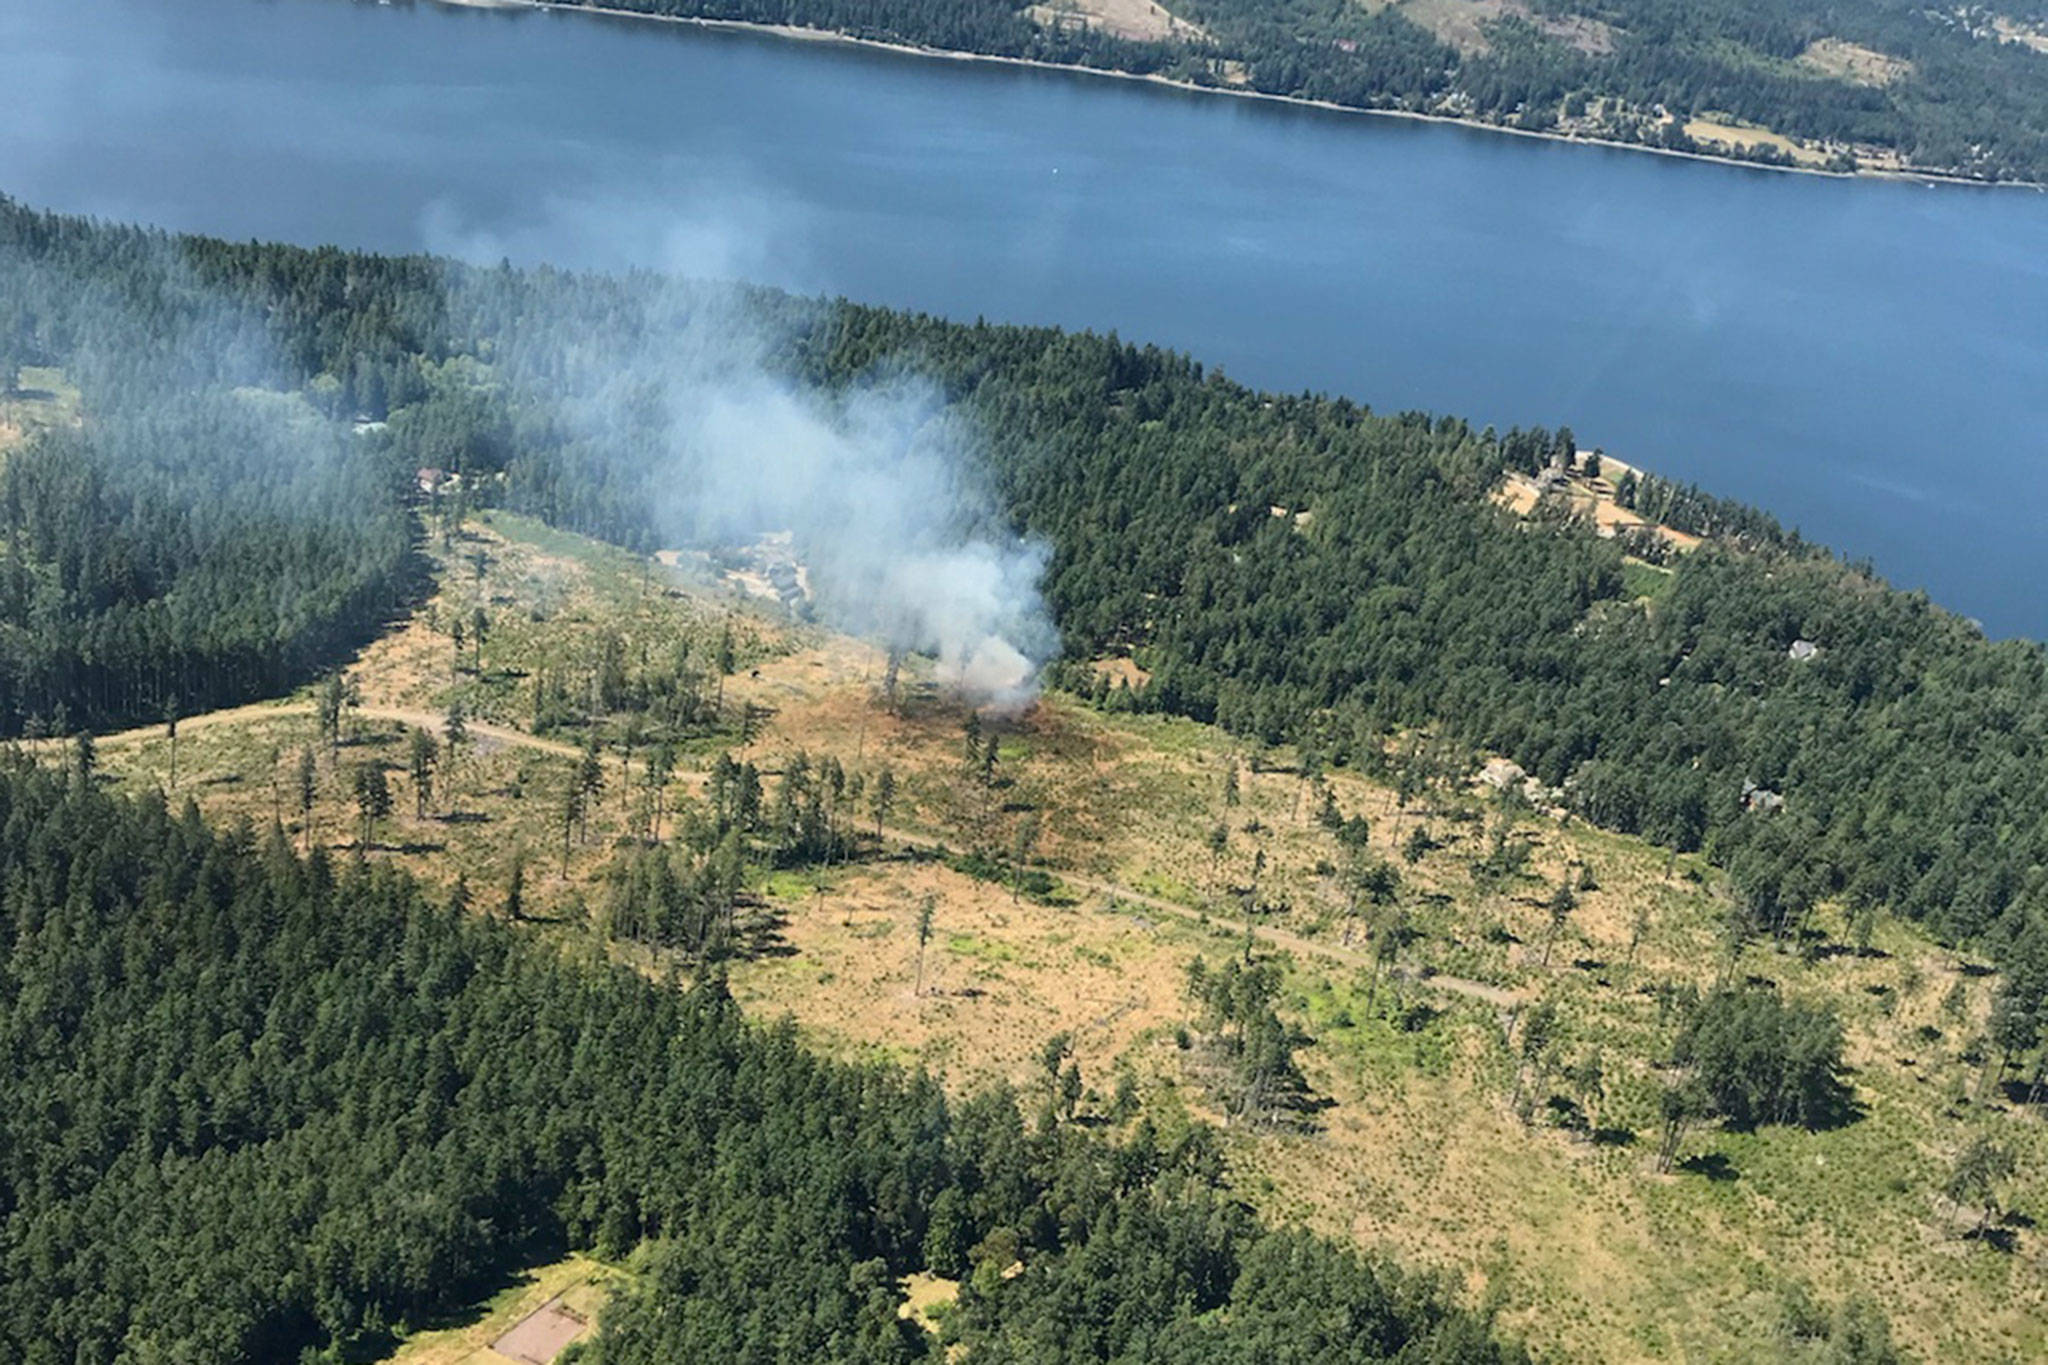 Local pilot Mike Radford shot a photo of the brush fire near Rhapsody Drive when he was in the area the same time the fire was dispatched by 911. Photo courtesy of Clallam County Fire District No. 3